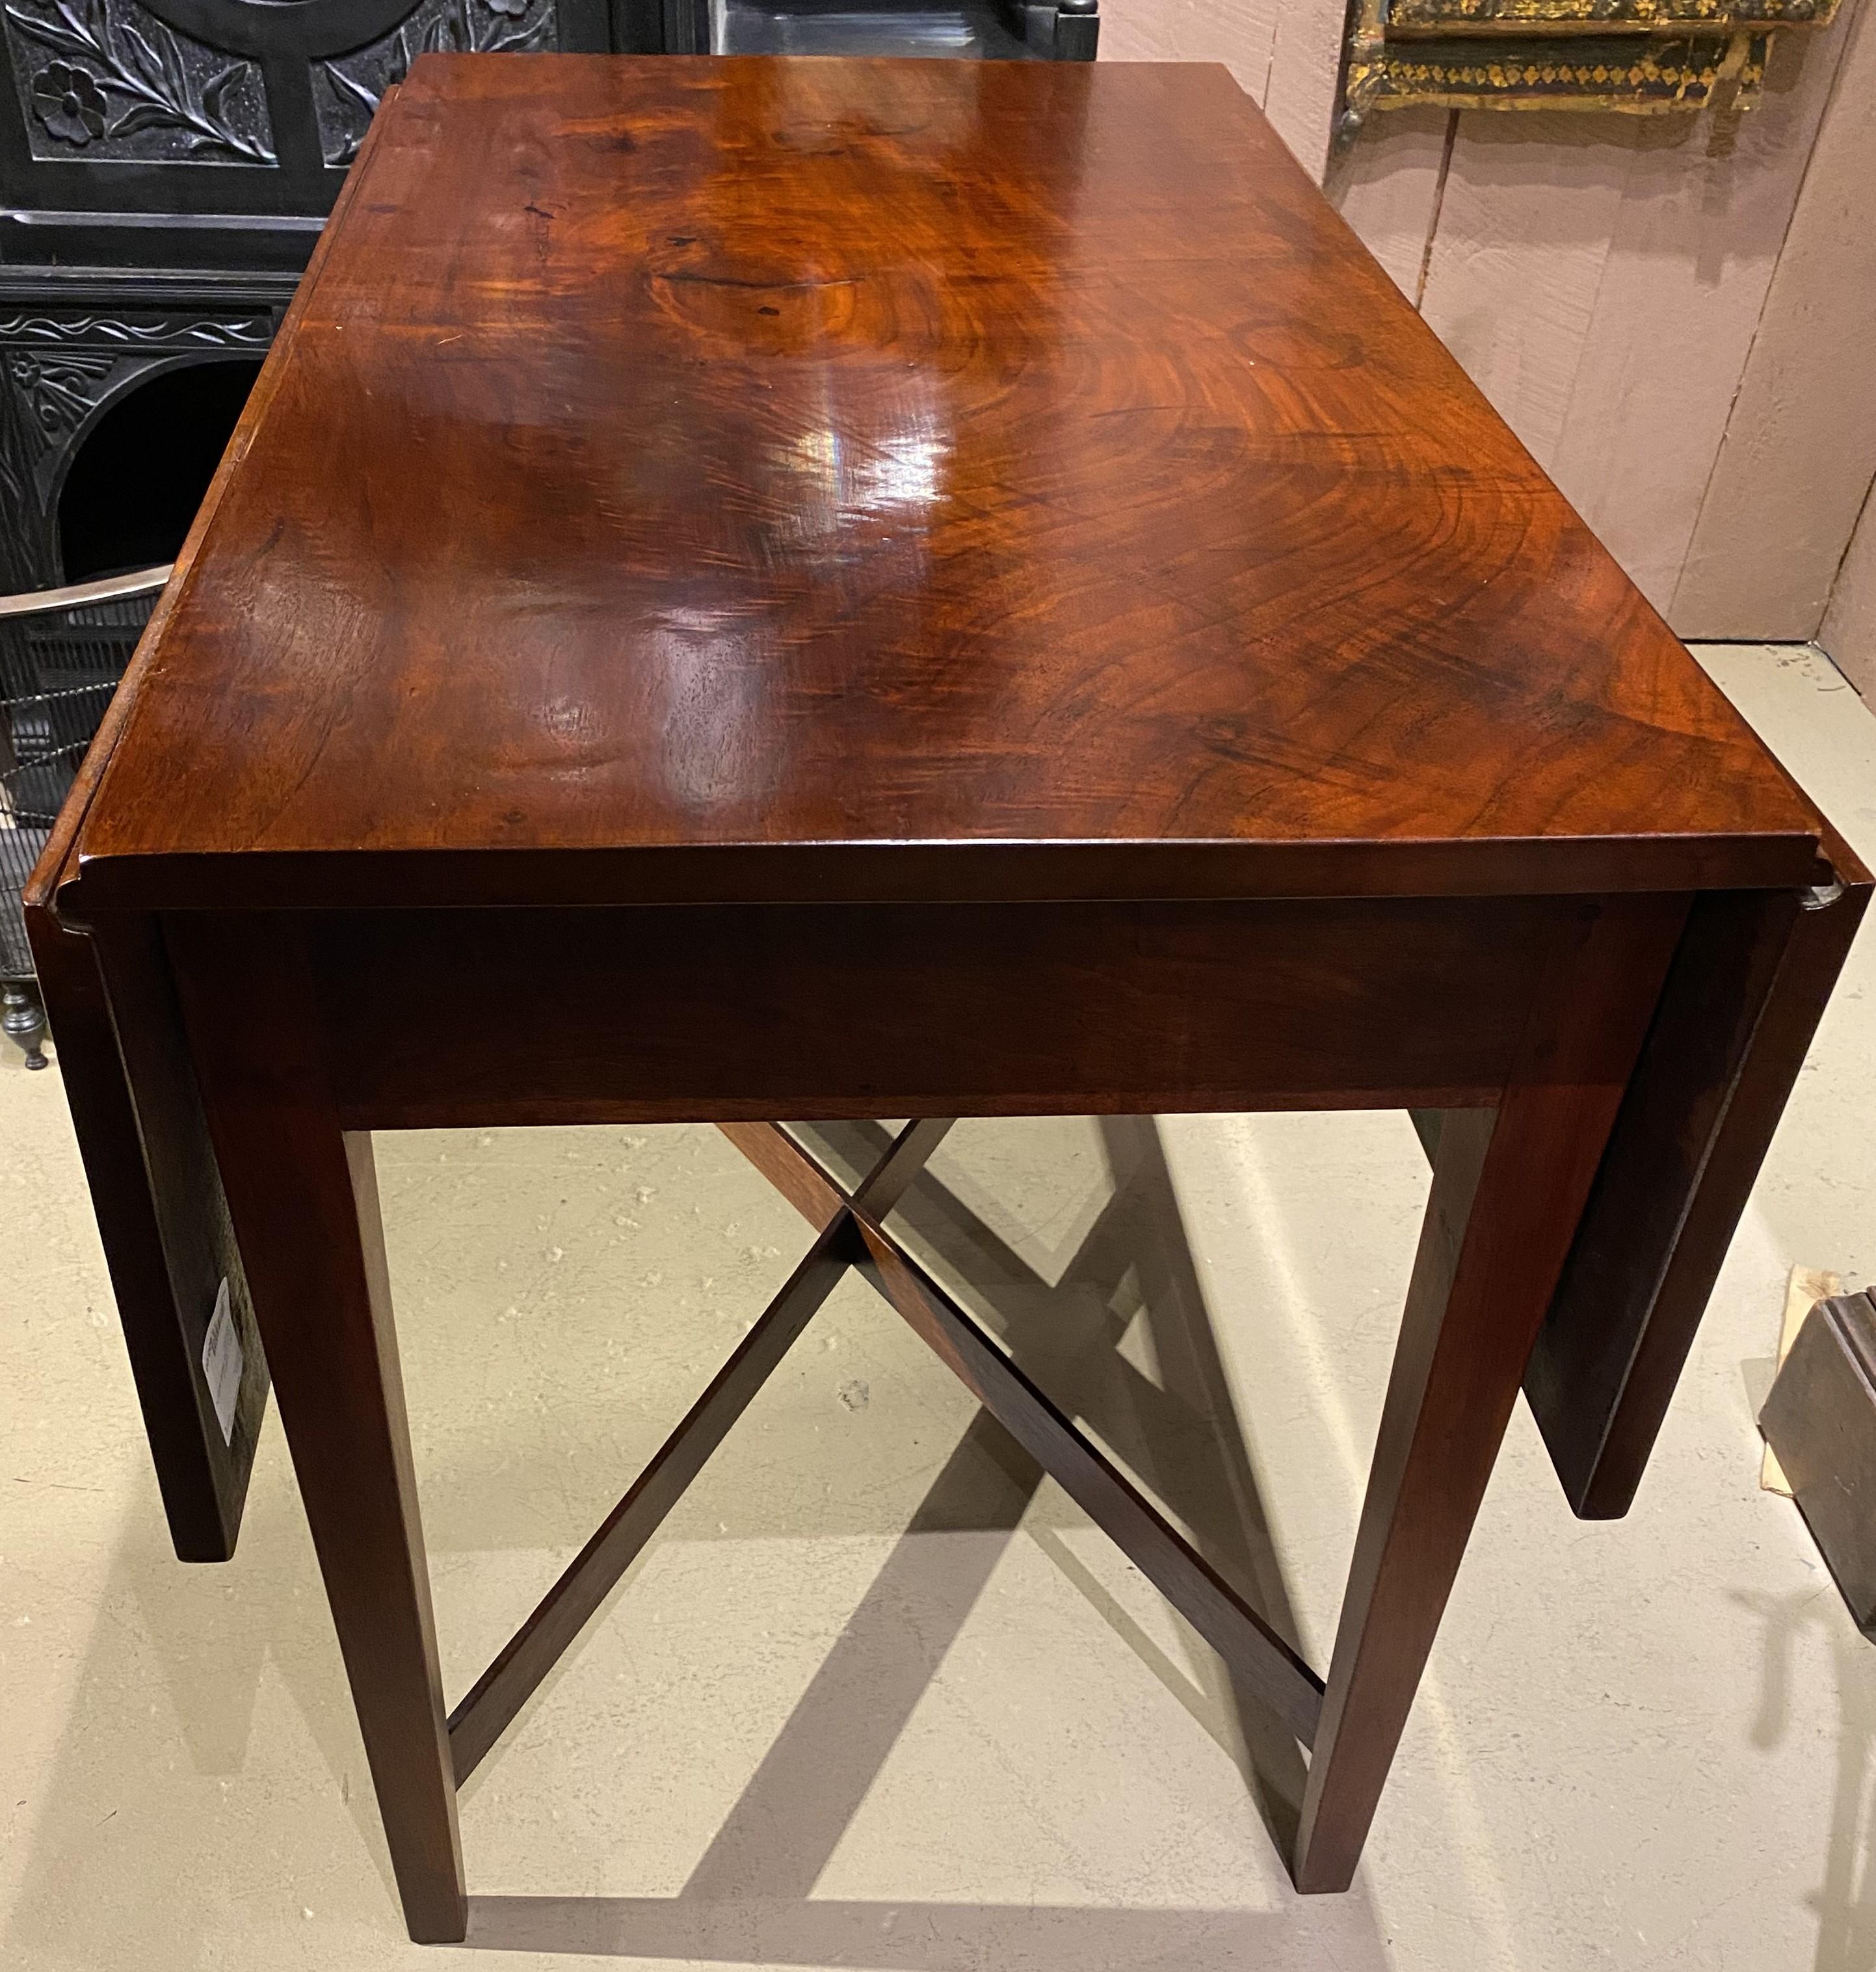 Hand-Carved Hepplewhite Walnut Pembroke Drop Leaf Table with Cross X Stretchers For Sale